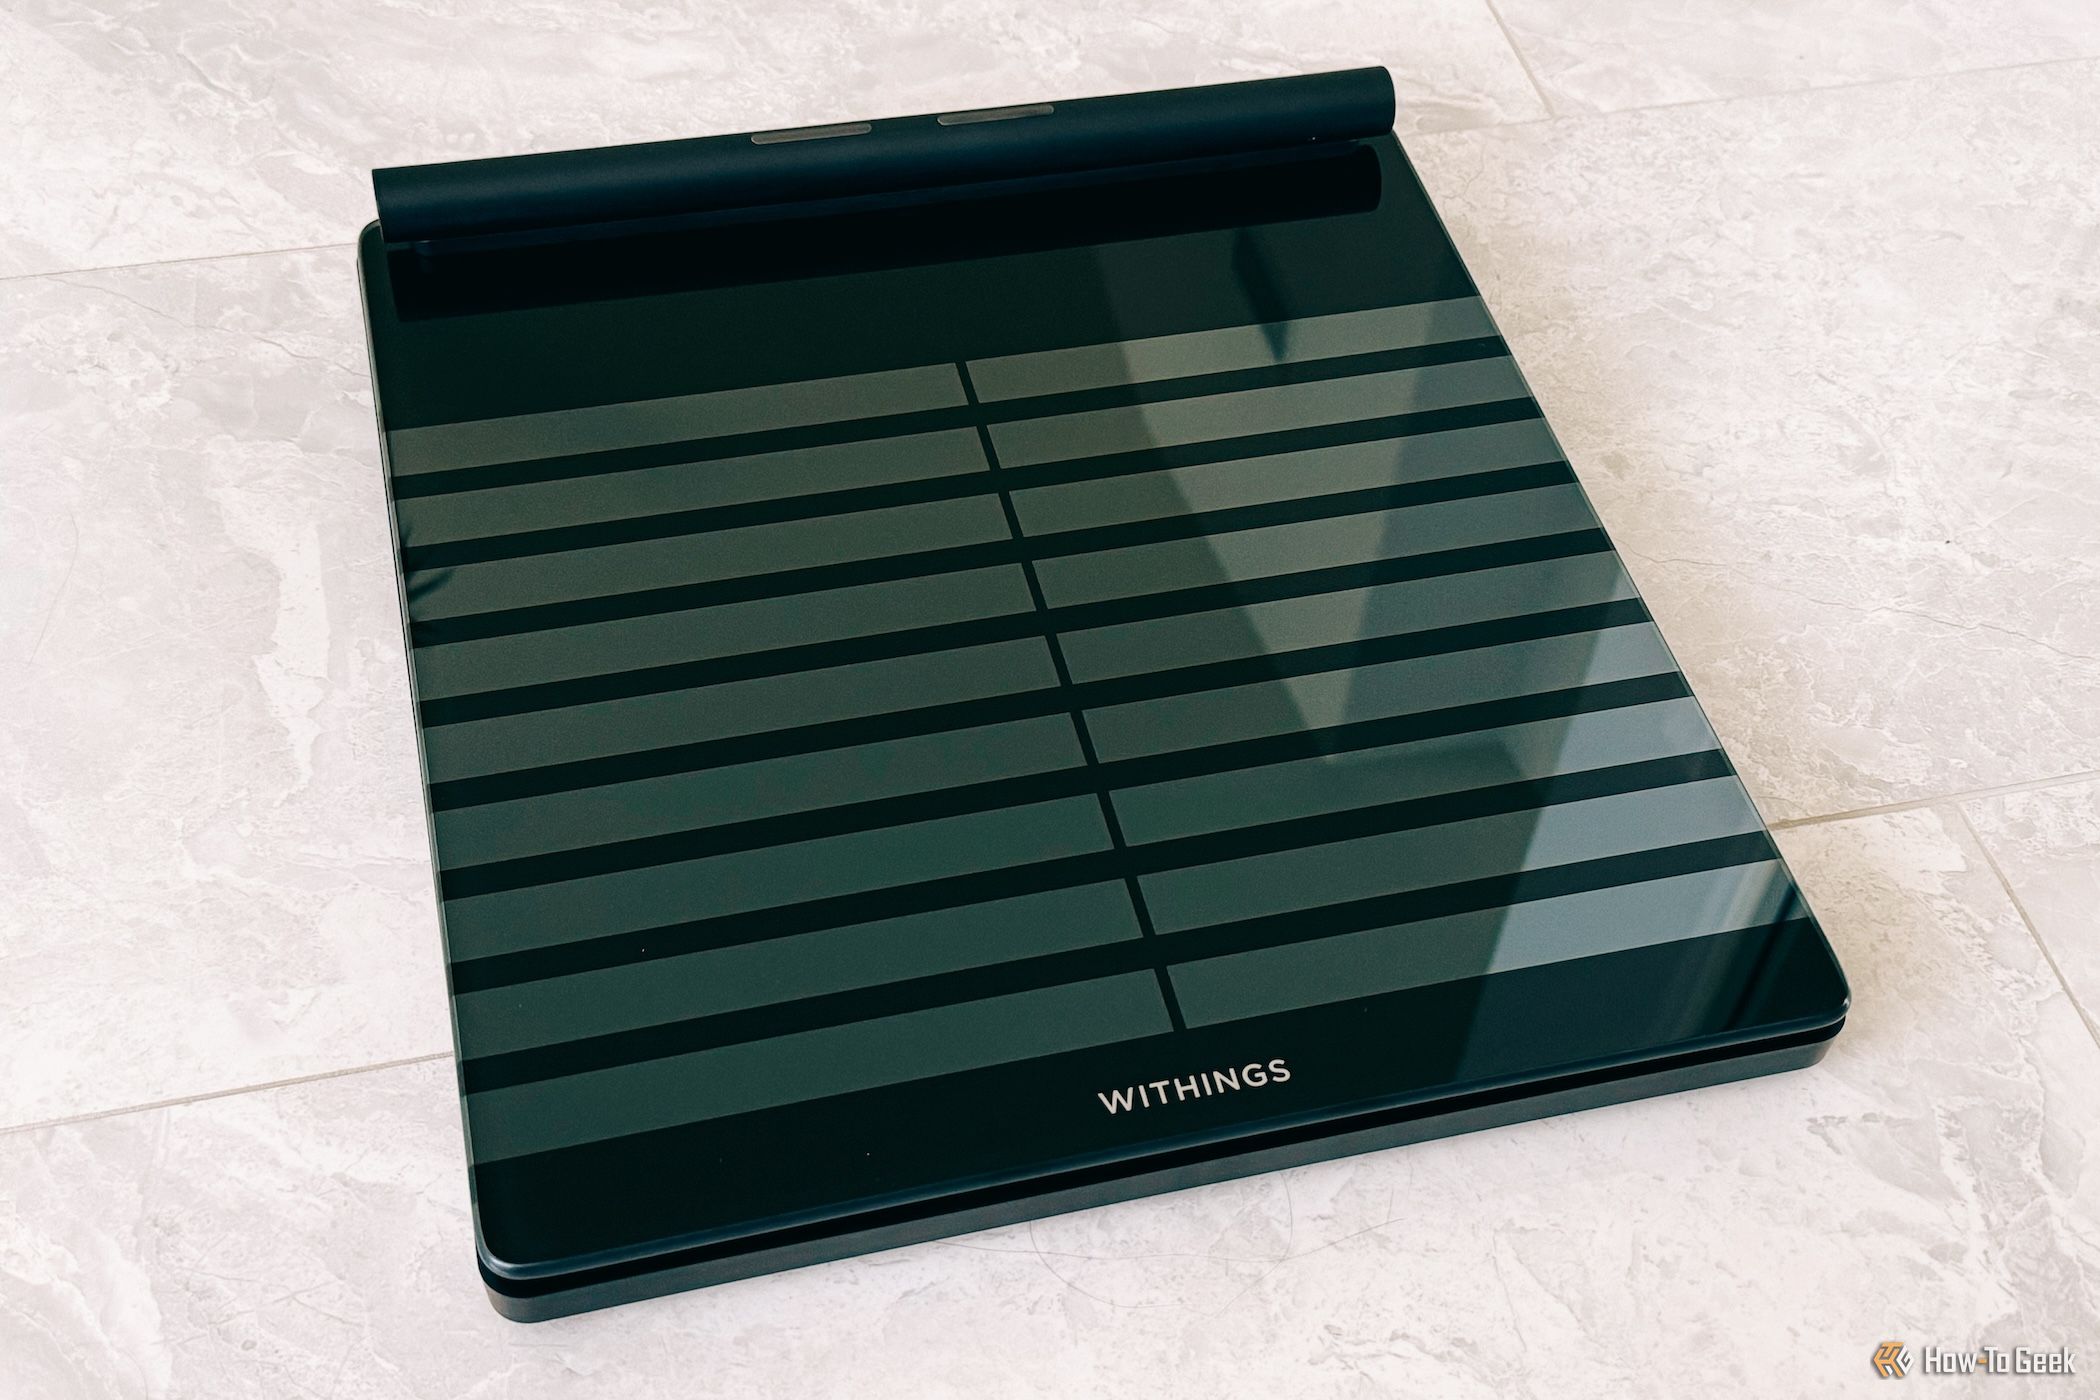 Withings Body Scan in the black color option